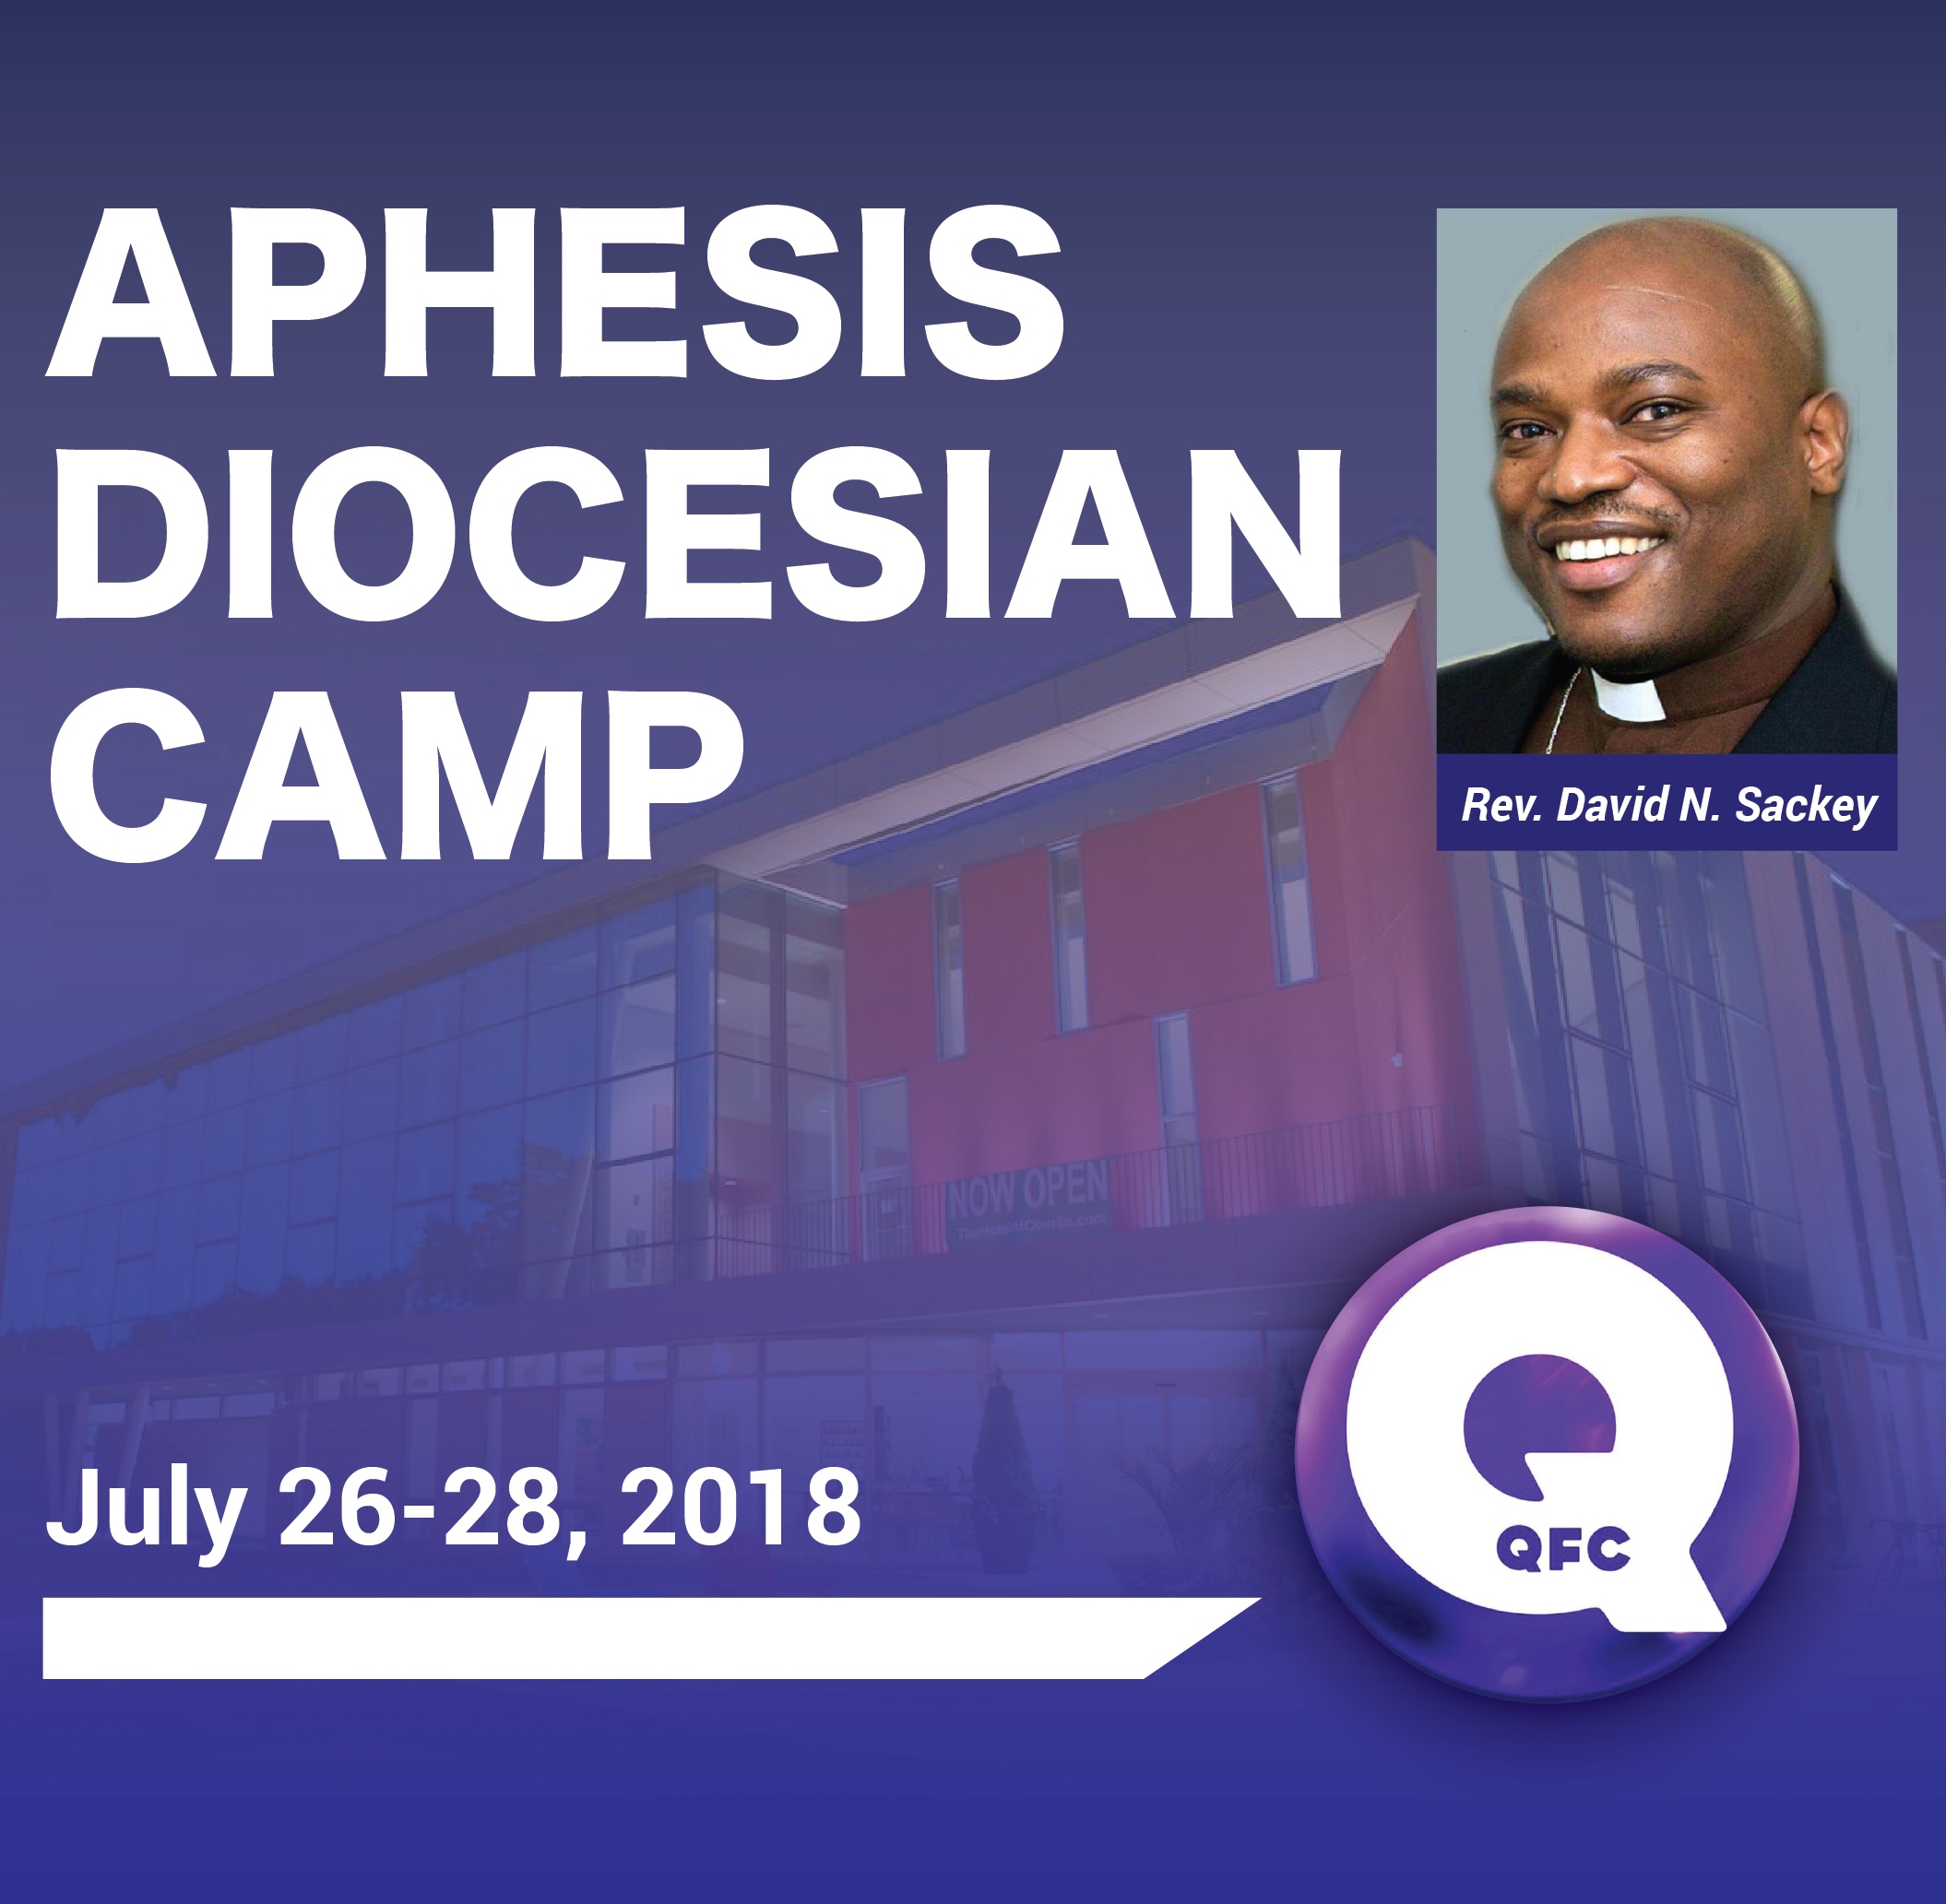 Aphesis Diocesan Camp 2018 - 27th July Session 2